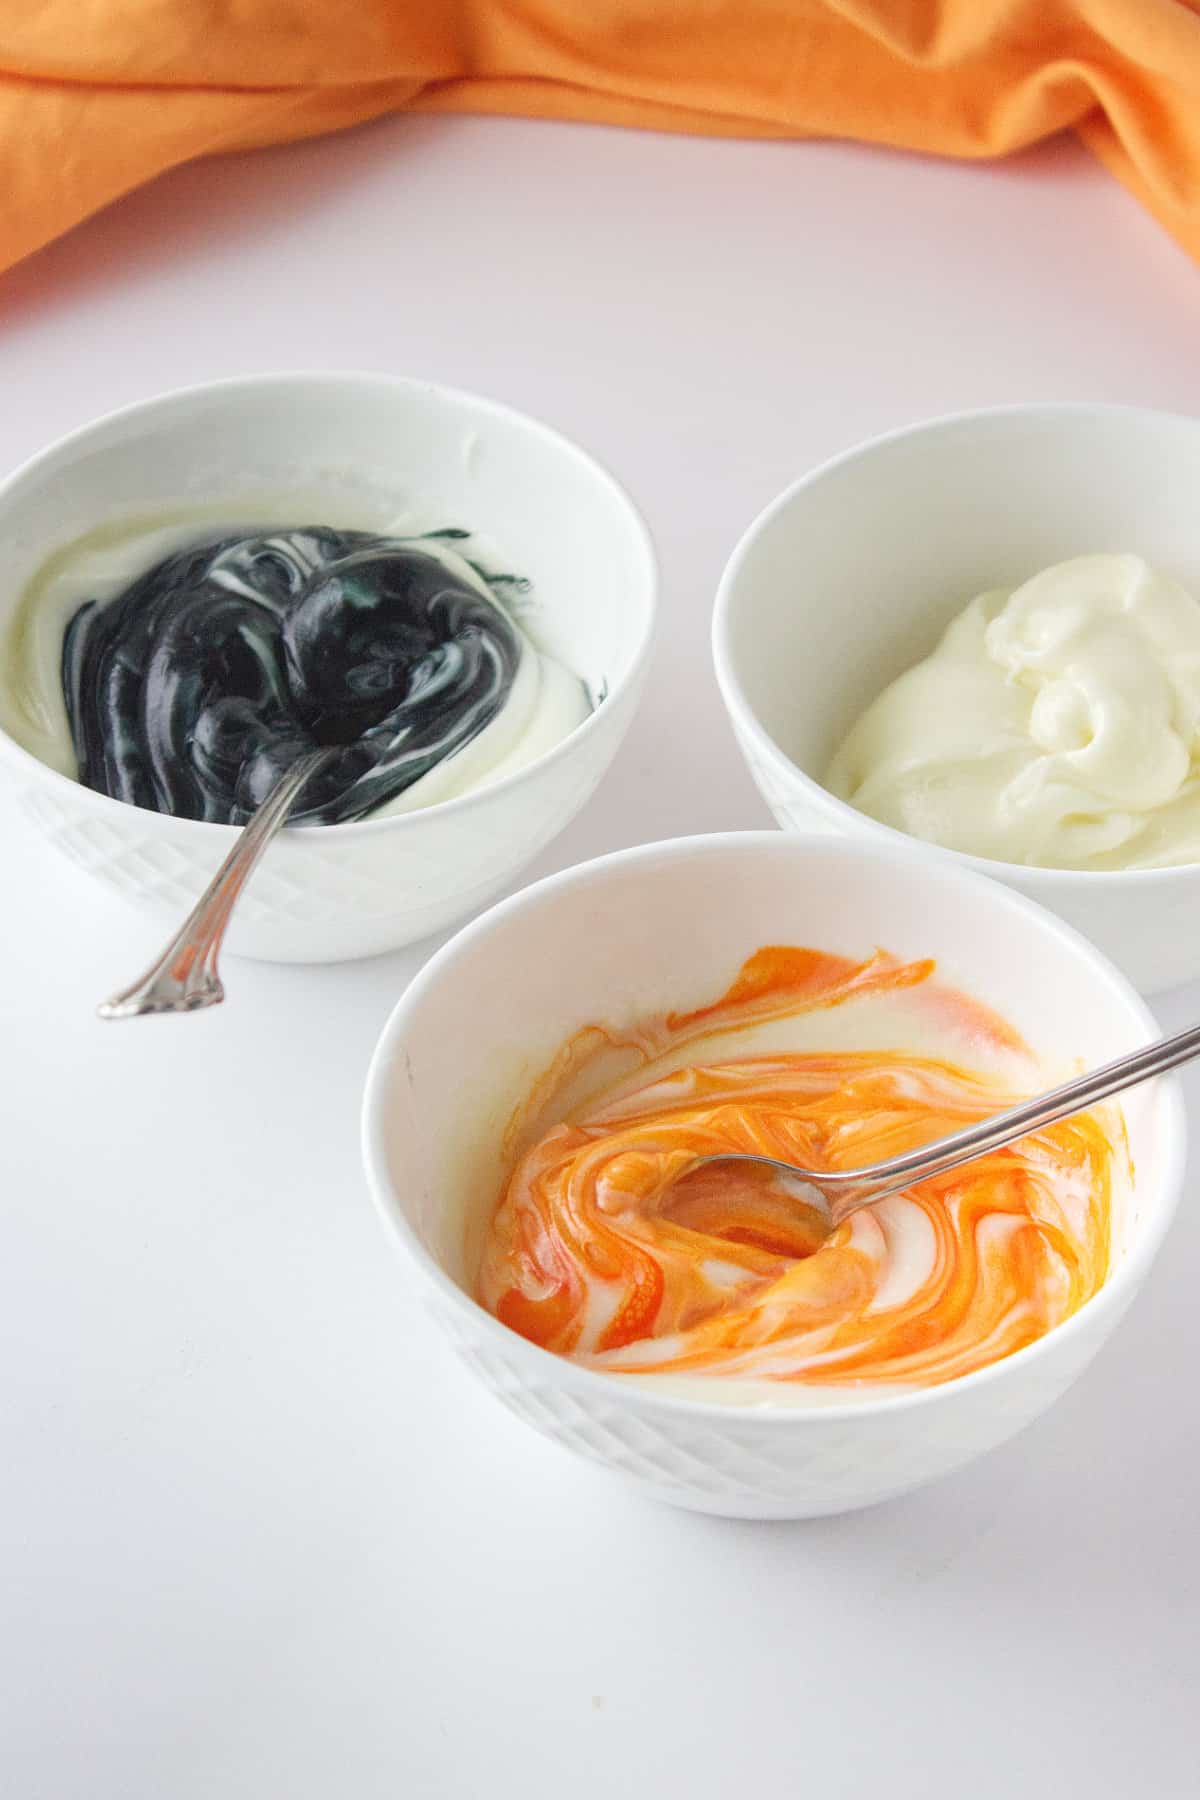 bowls of black, orange, and white frosting.